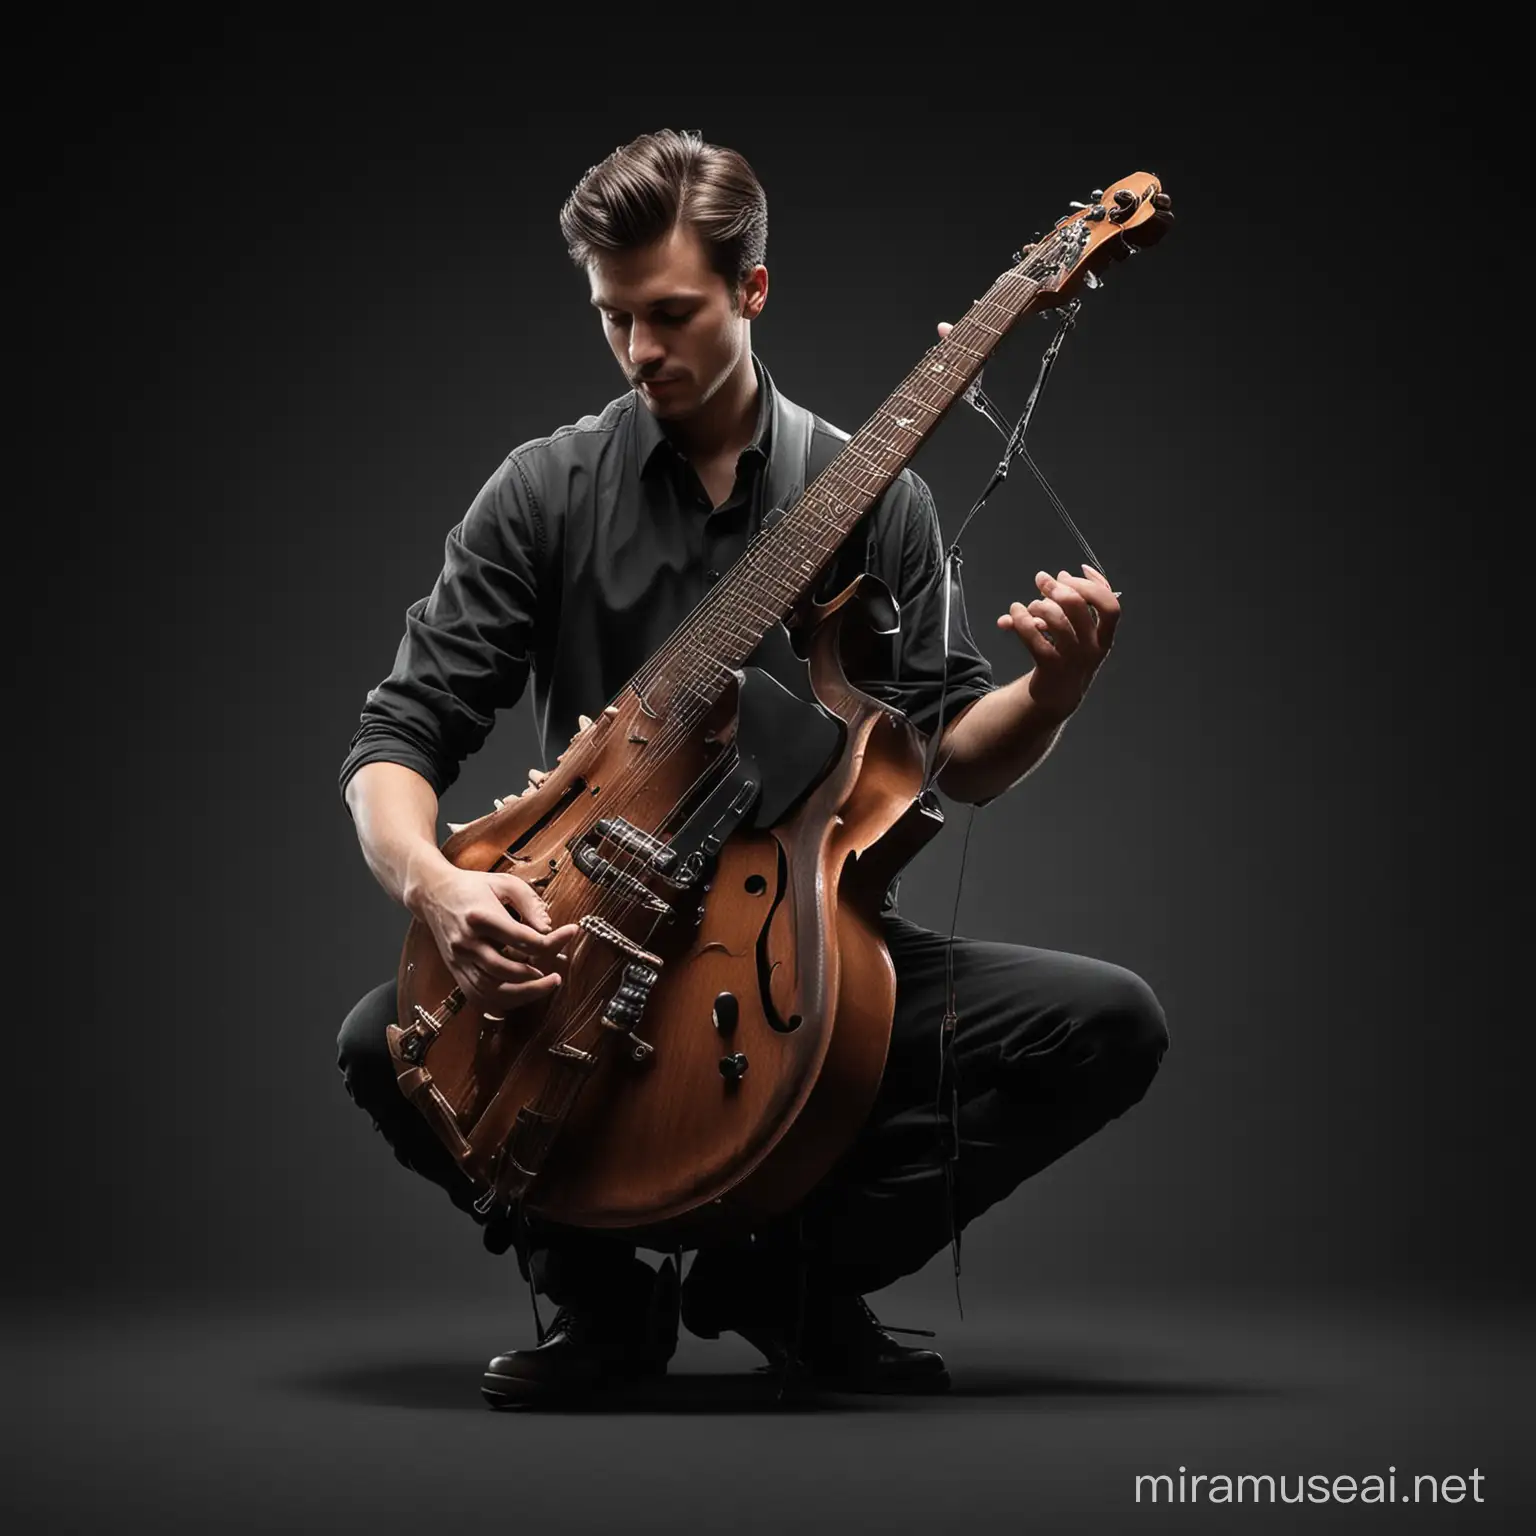 Man Blending with Musical Instrument on Black Background in 3D Realistic Style